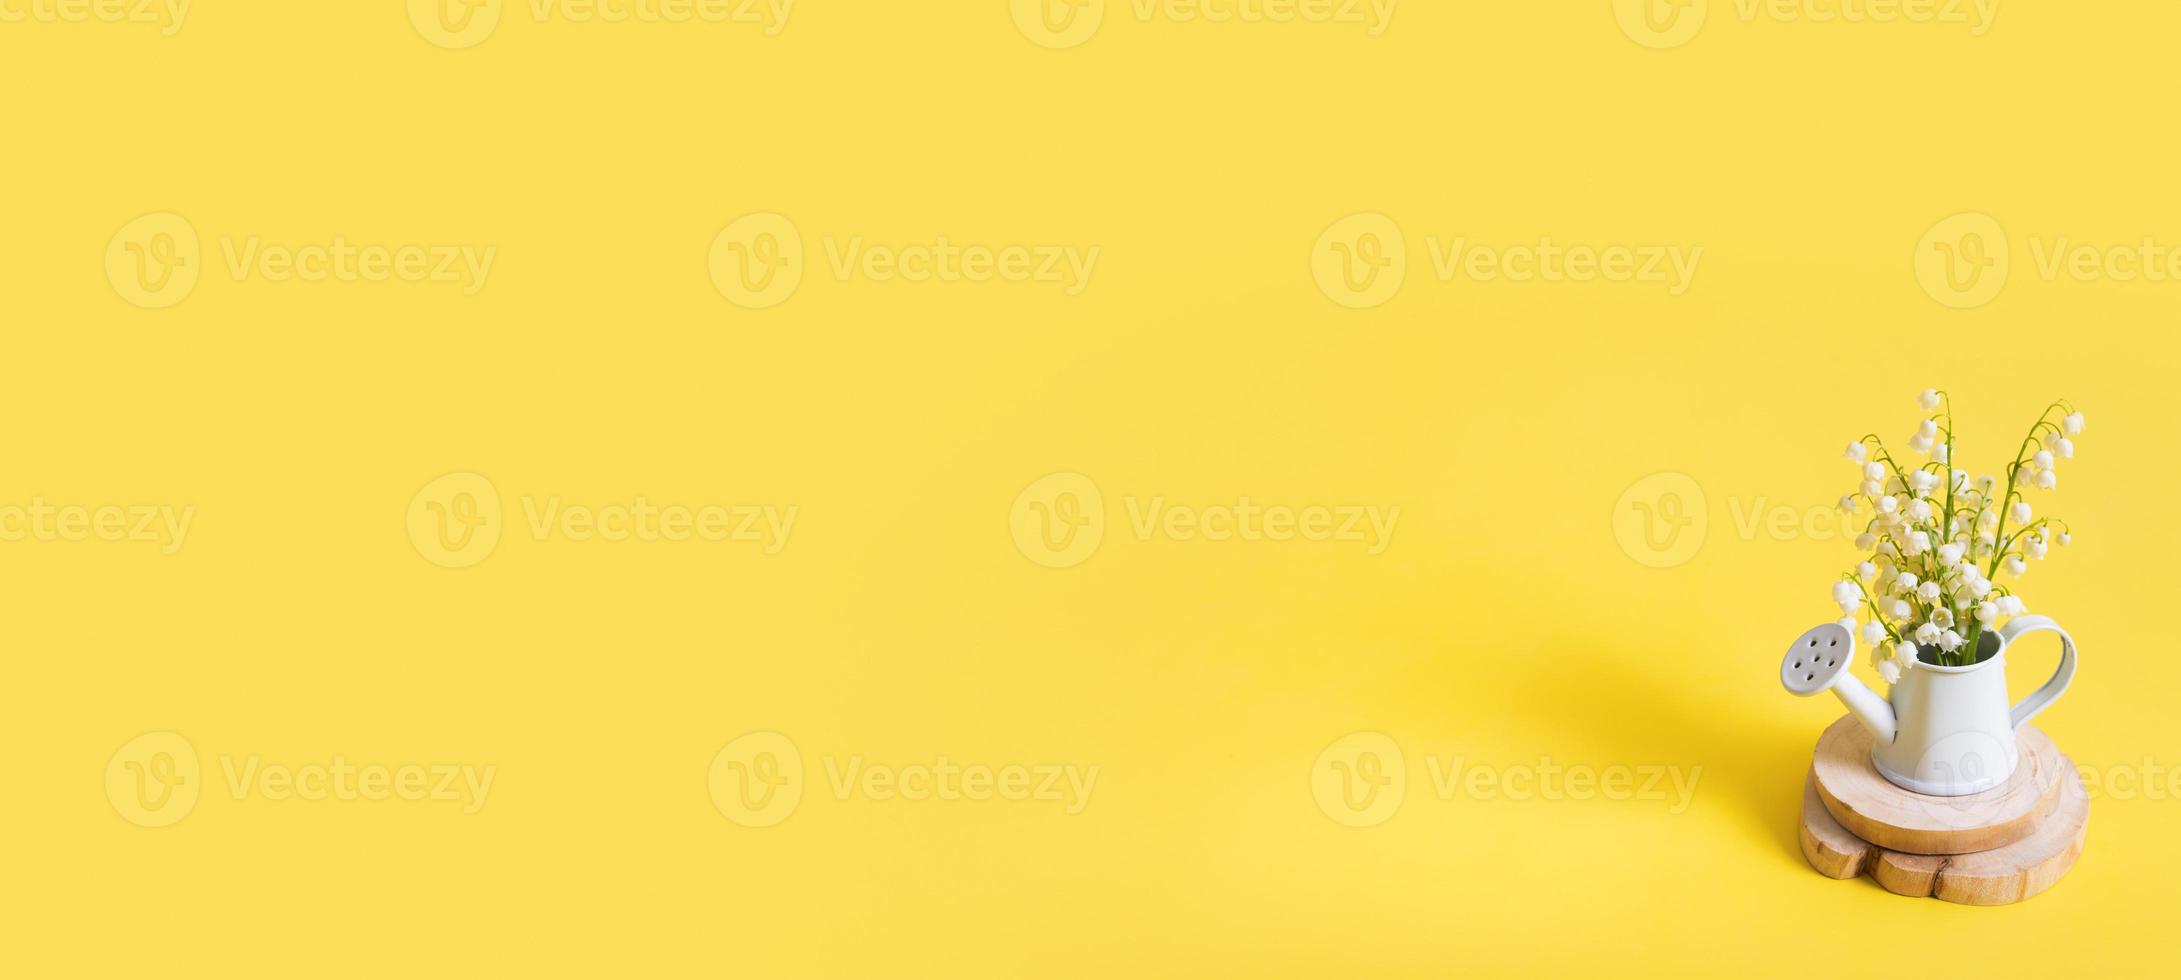 Banner with lilies of the valley bouquet in a decorative watering can on a yellow background with copy space photo